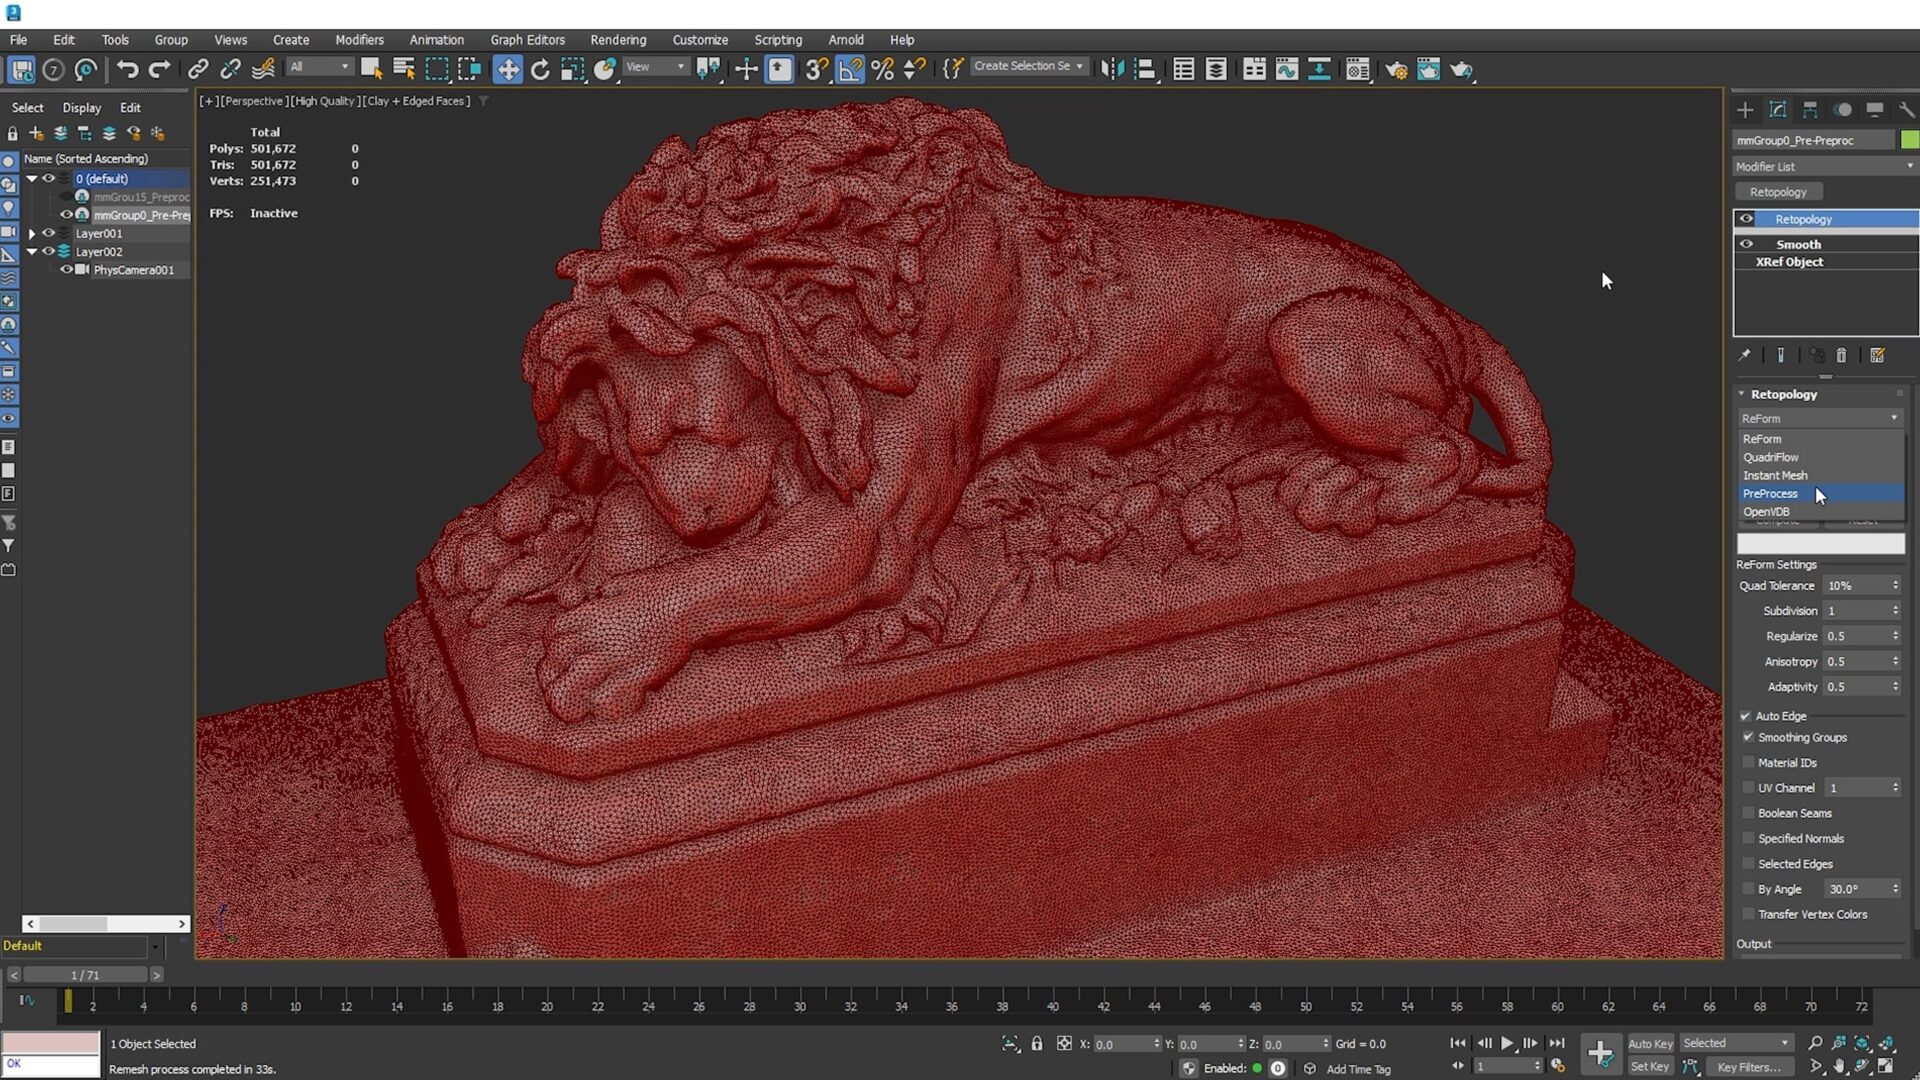 Autodesk 3ds Max in use